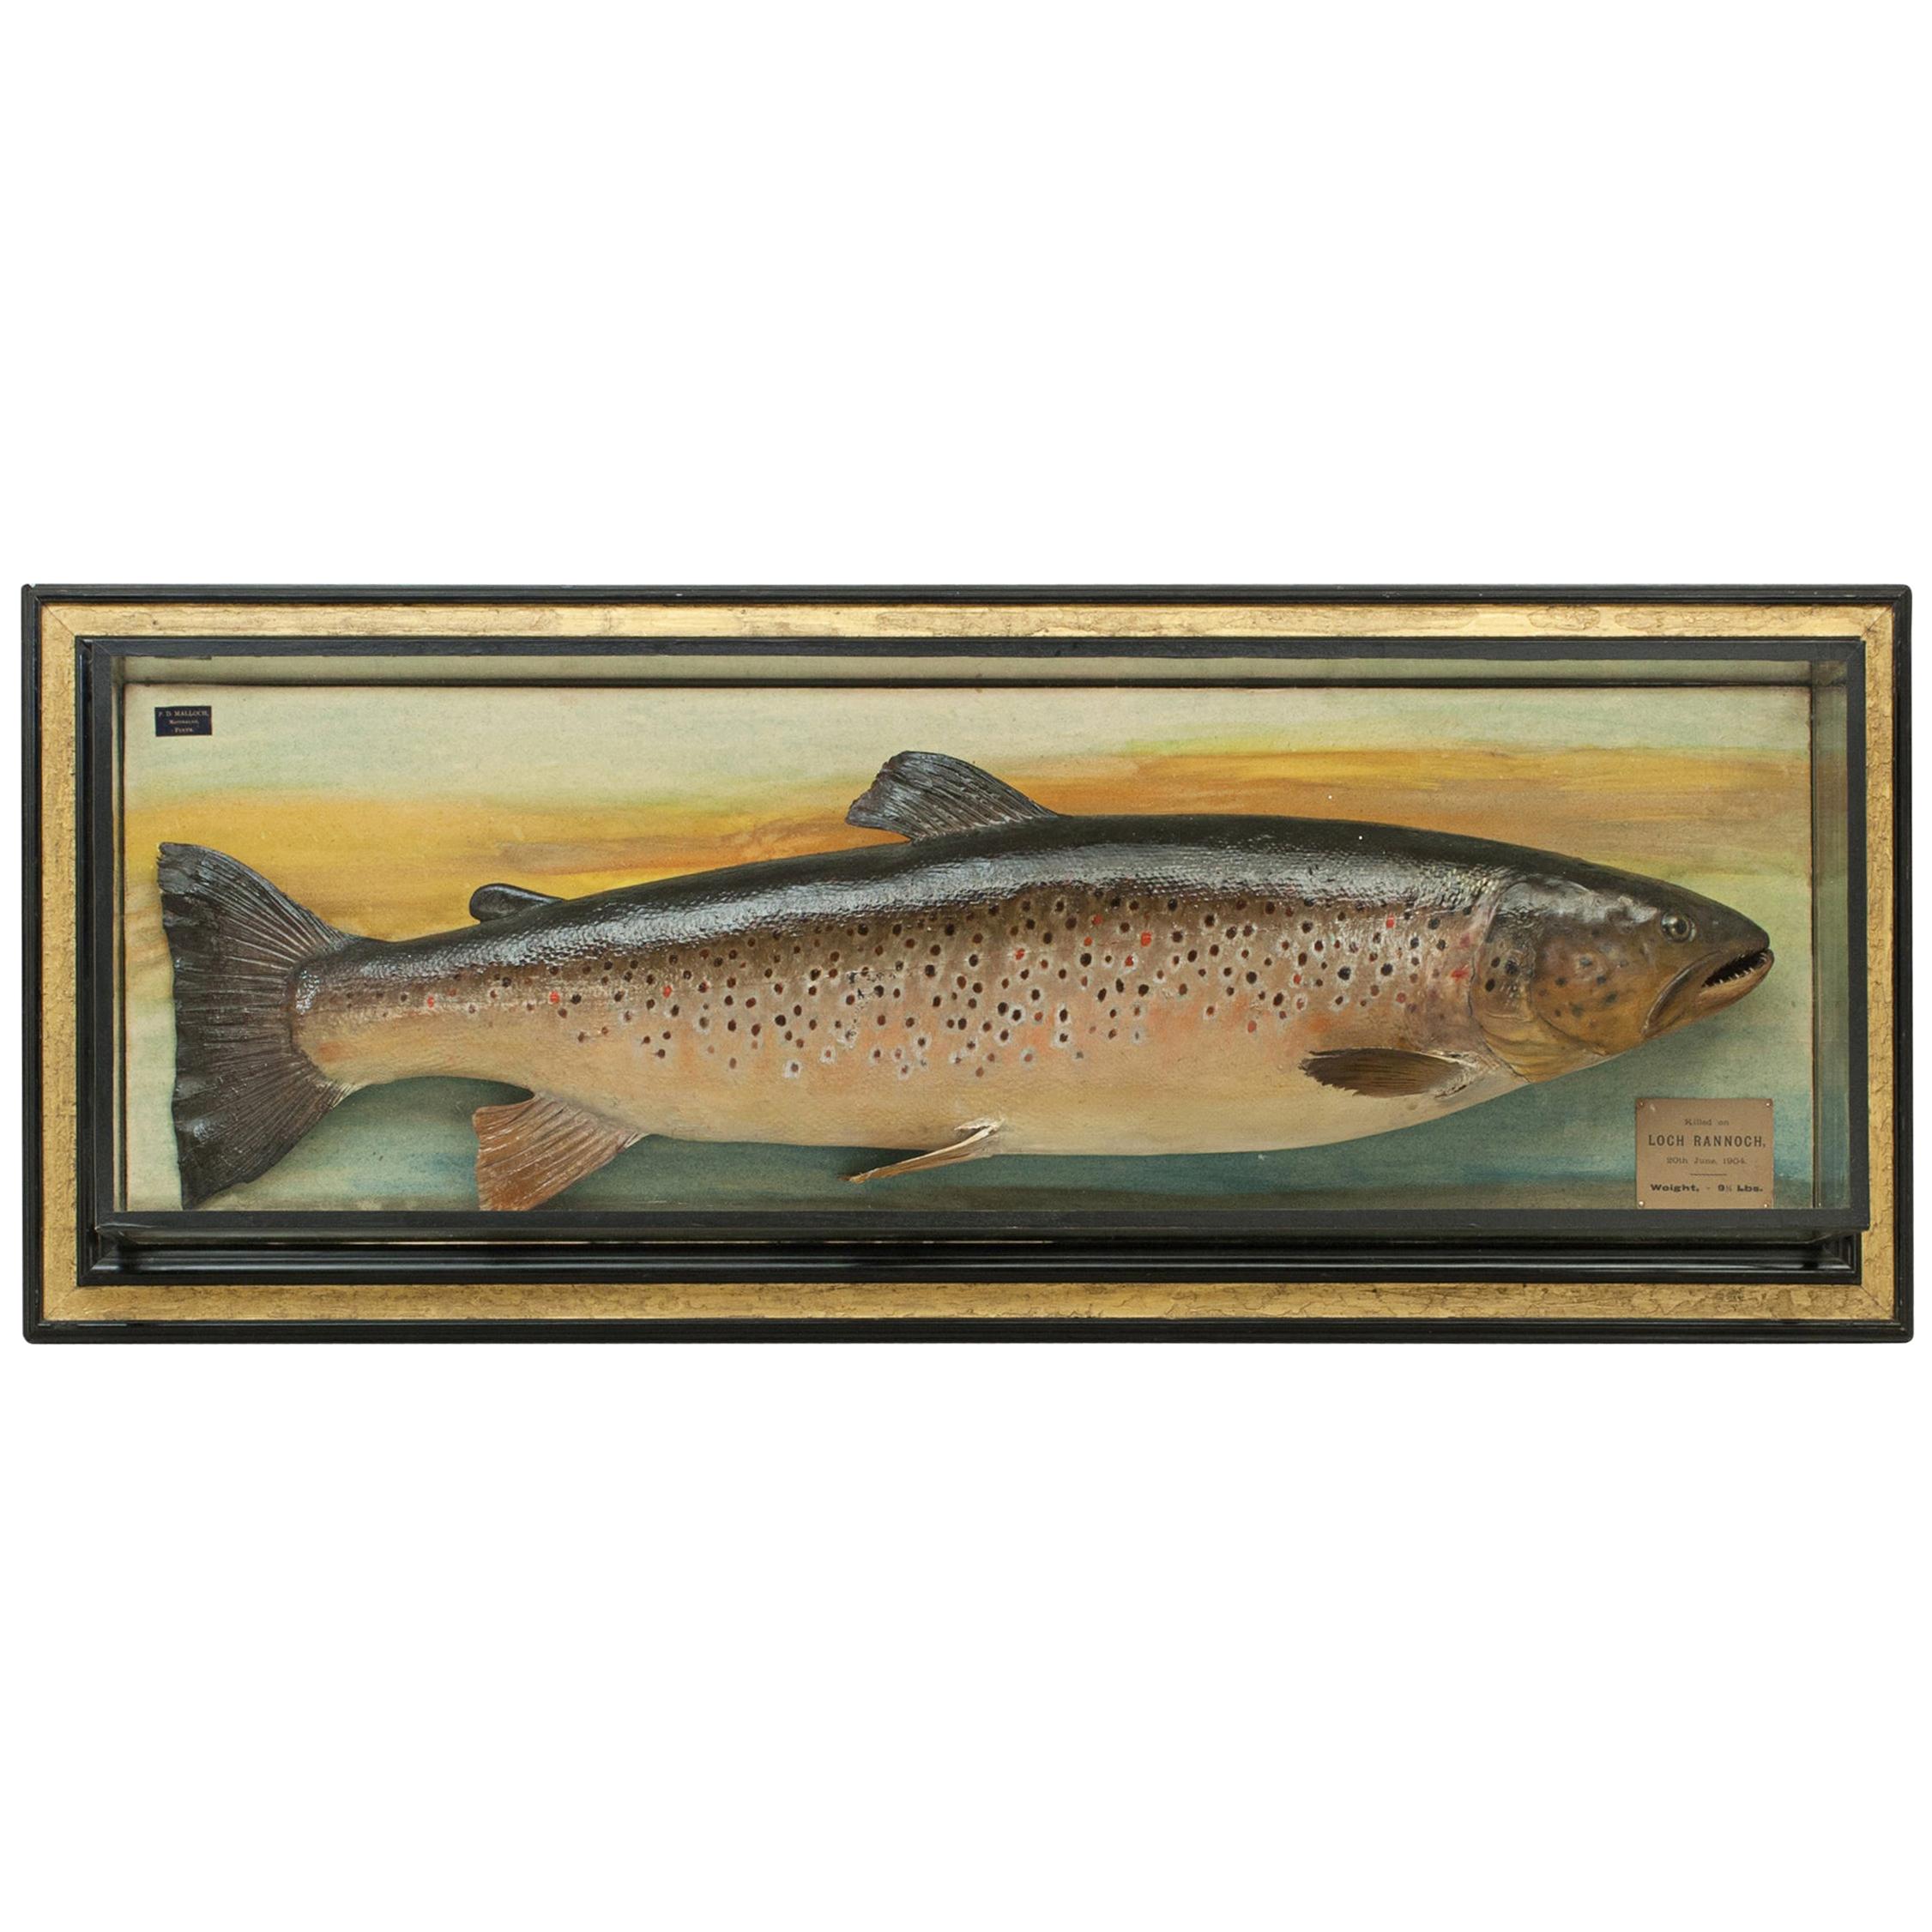 Antique Trophy Fish Model of a Brown Trout by Malloch of Perth